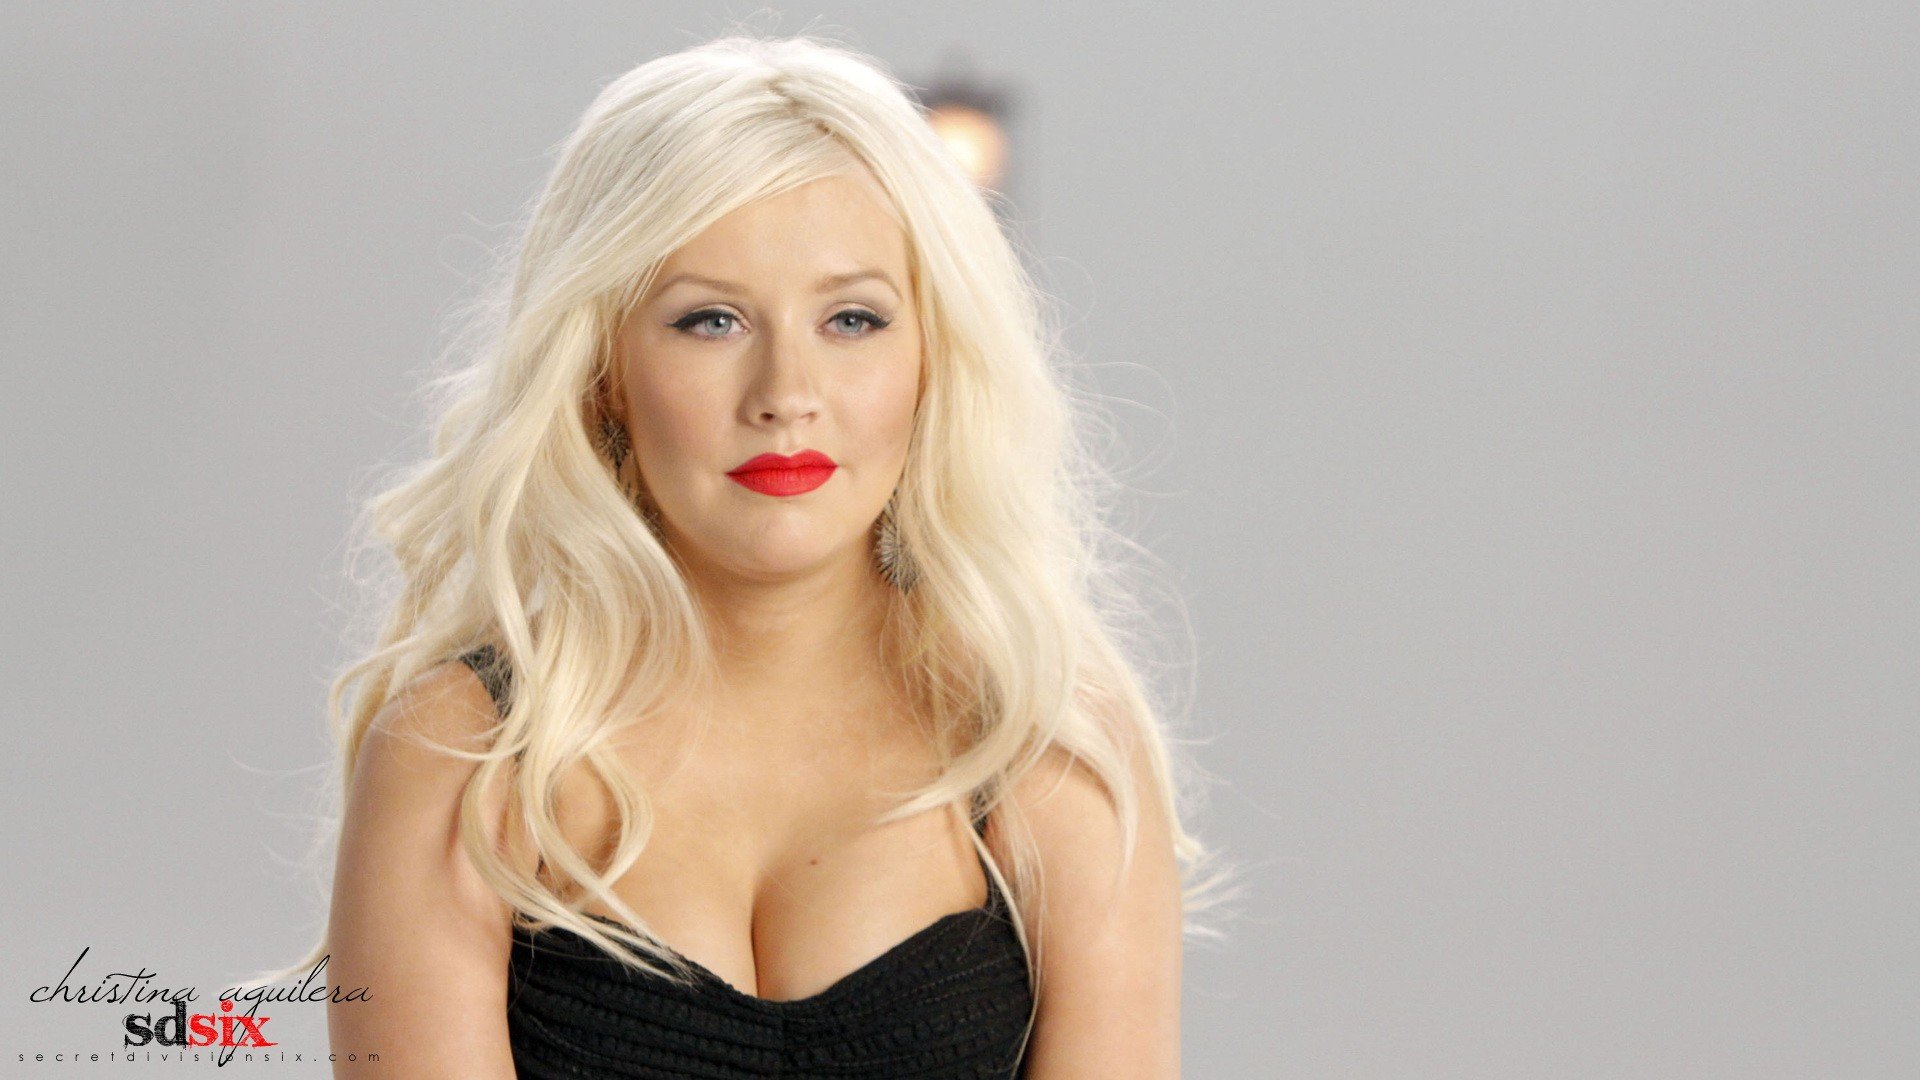 Celebrity Christina Aguilera Hd Wallpapers Desktop And Mobile Images And Photos 